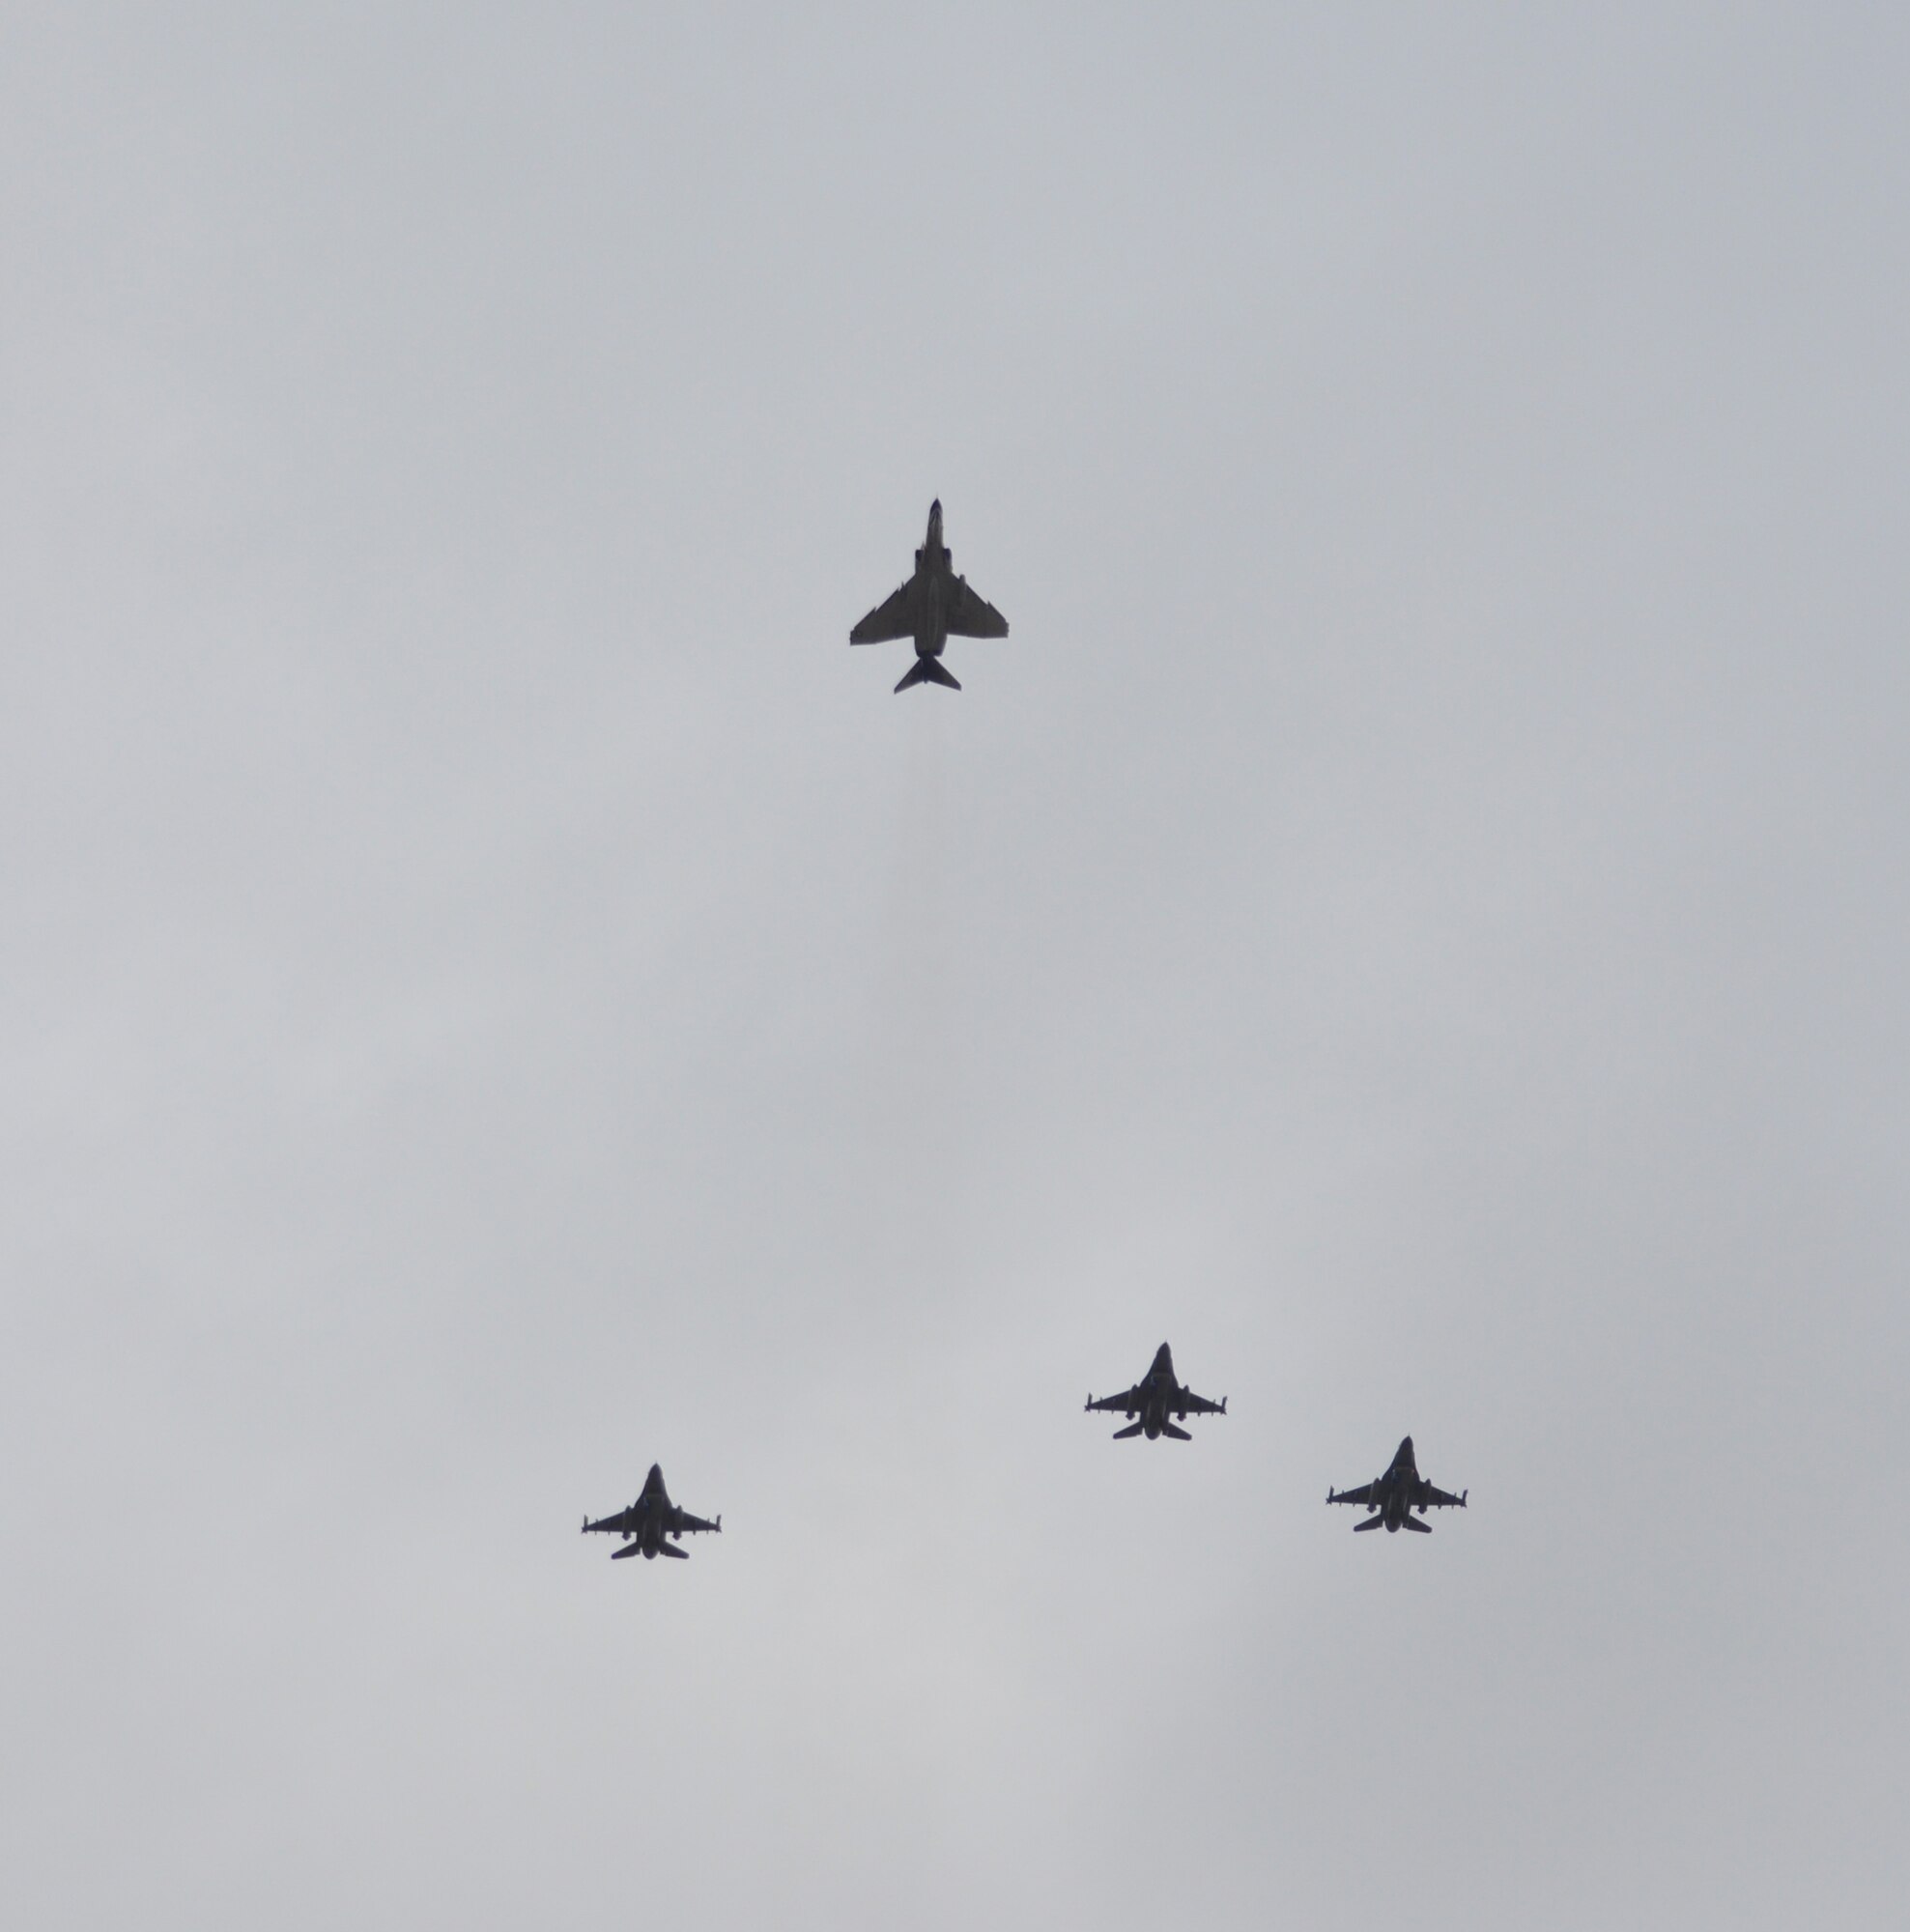 Three F-16s from the 301st Fighter Wing, Naval Air Station Fort Worth Joint Reserve Base, Texas, and an F-4 from Detachment 1, 82nd Aerial Targets Squadron, Holloman Air Force Base, N.M., fly the missing man formation over a memorial service Jan. 14, 2011 at Dallas-Fort Worth National Cemetery. The service honored Col. James E. Dennany and Maj. Robert L. Tucci, who were reported missing in action after their F-4 went down during a mission over Laos Nov. 12, 1969. (U.S. Air Force photo/SrA Melissa Harvey)